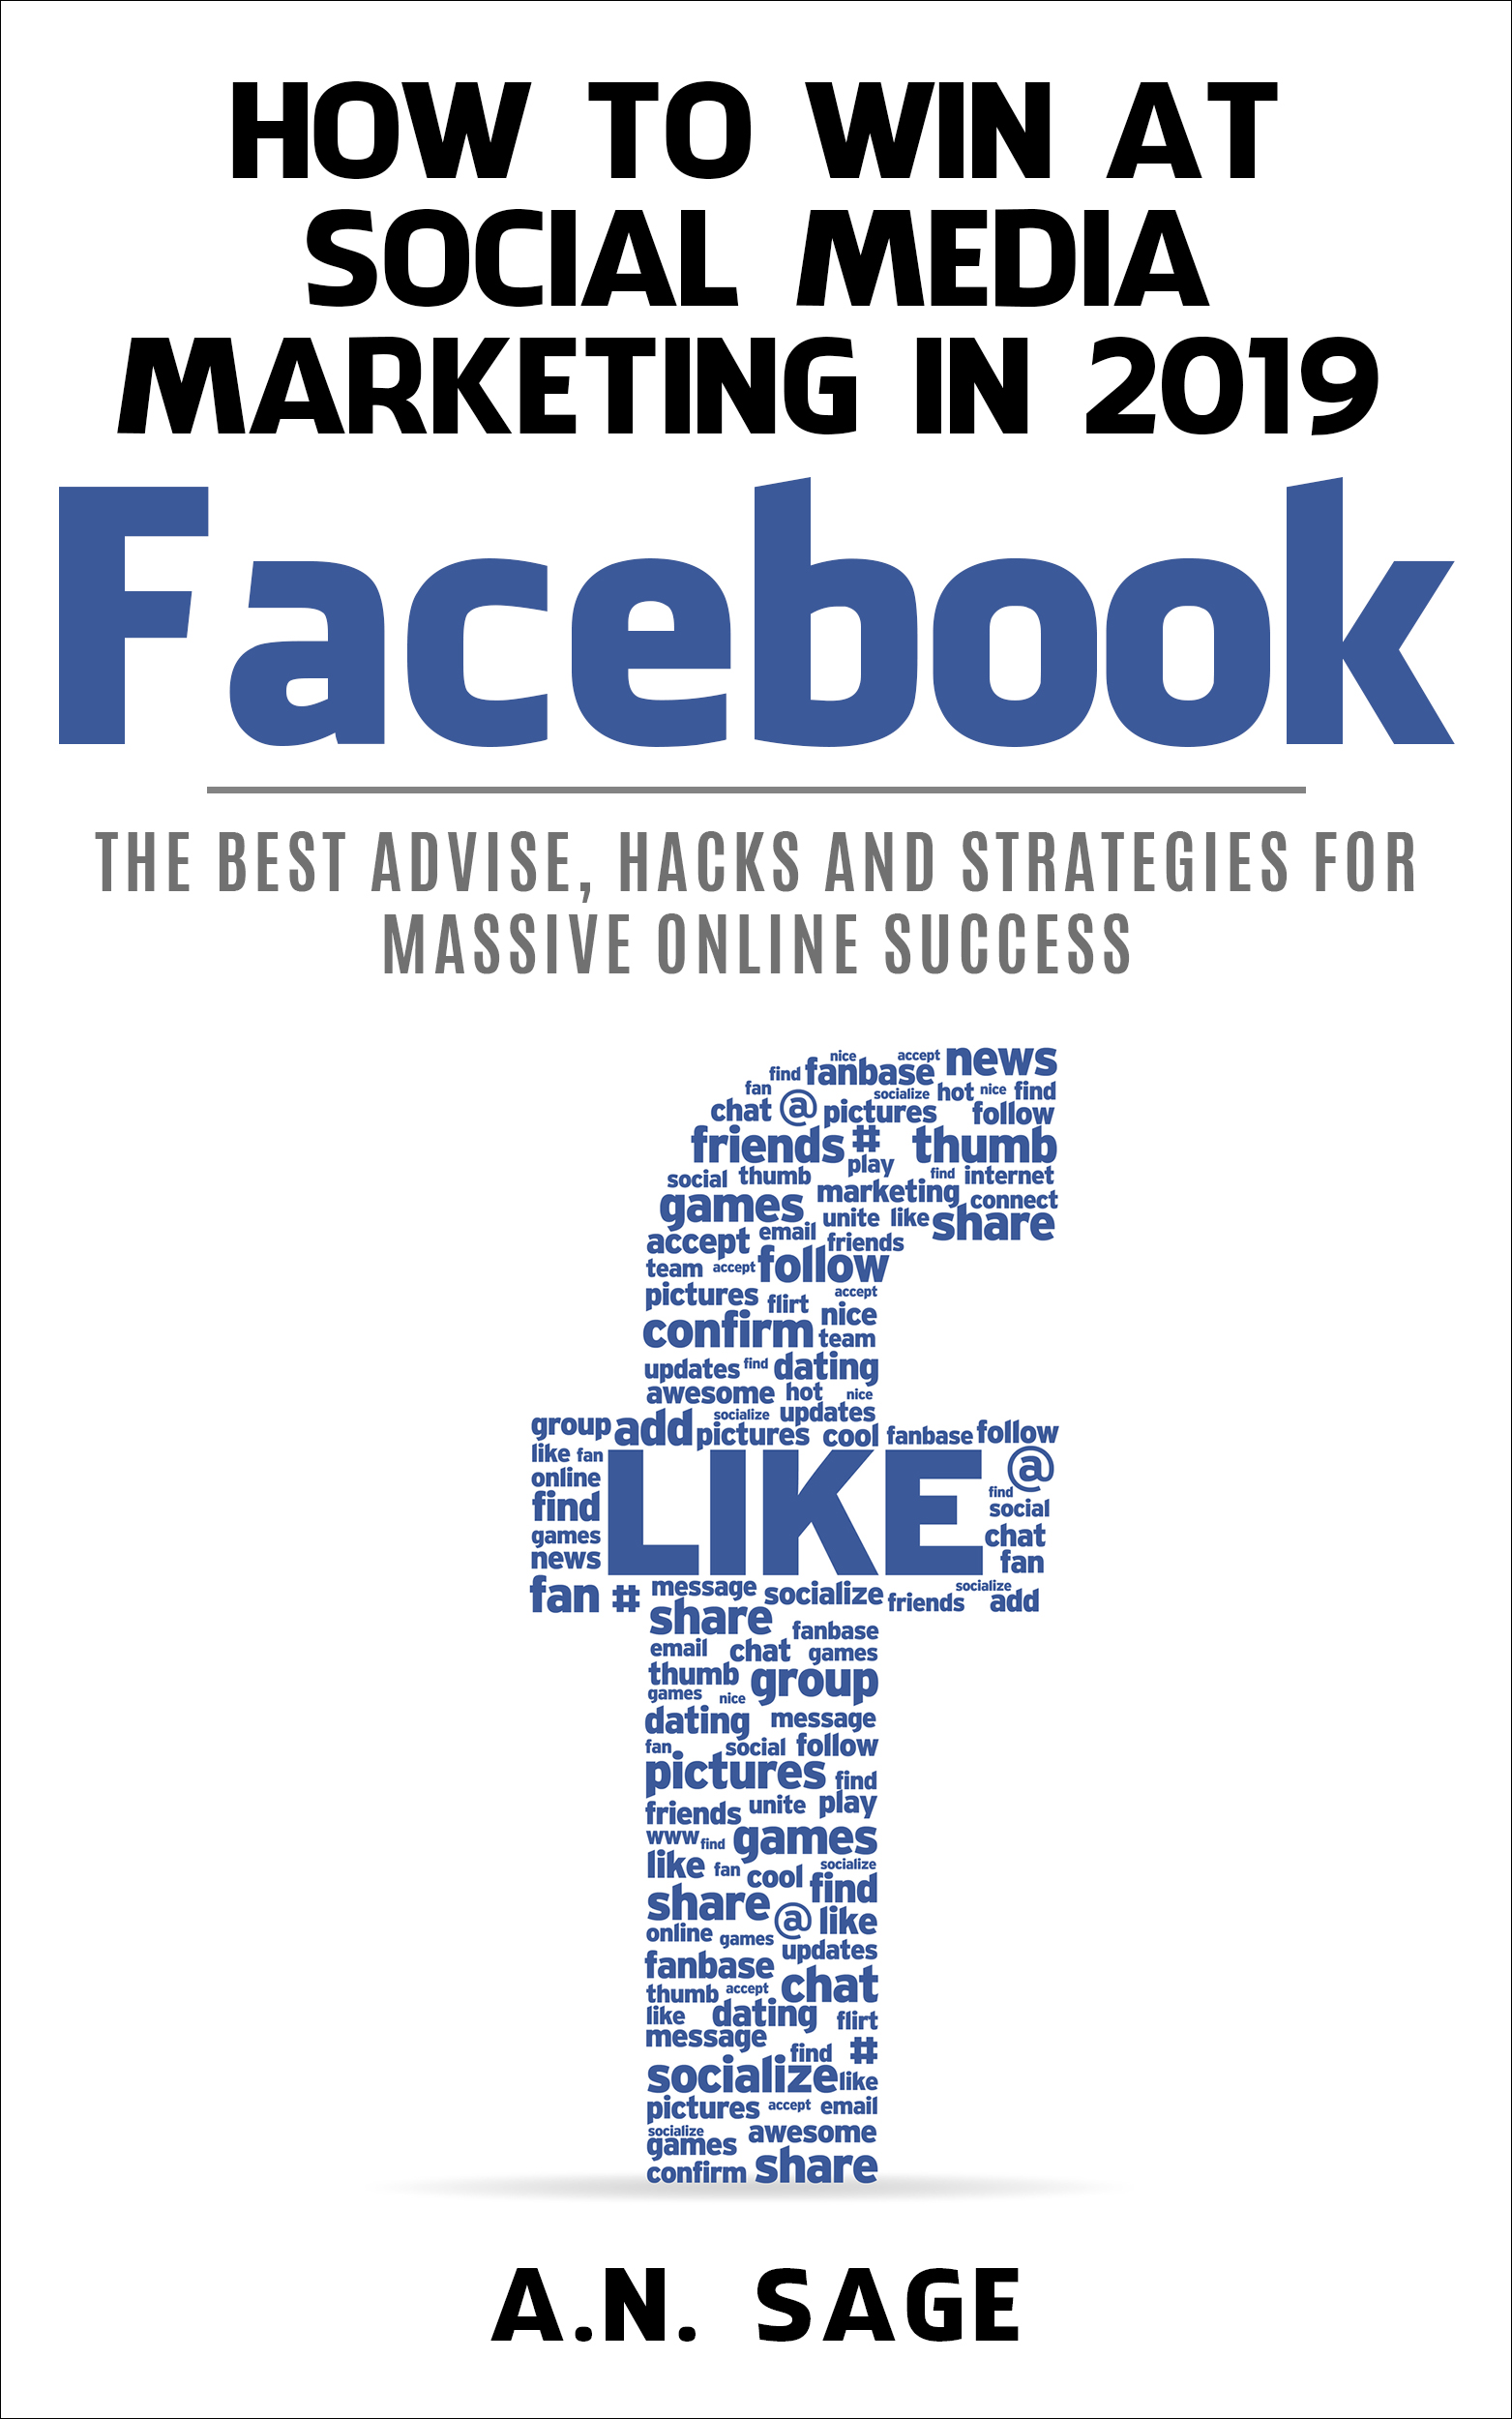 FREE: How to Win at Social Media Marketing in 2019: Facebook by A.N. Sage